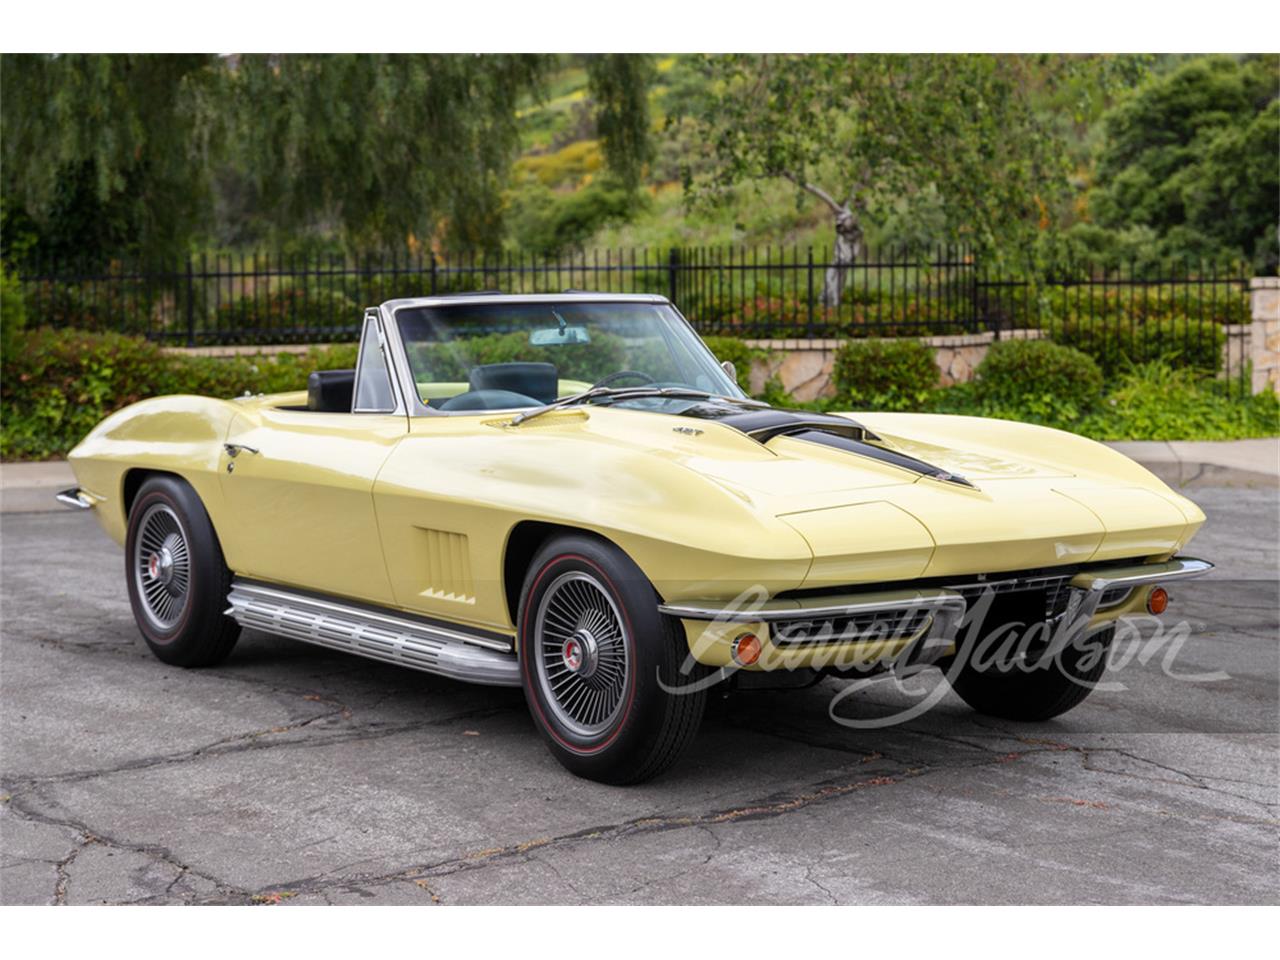 For Sale at Auction: 1967 Chevrolet Corvette in Scottsdale, Arizona for sale in Scottsdale, AZ